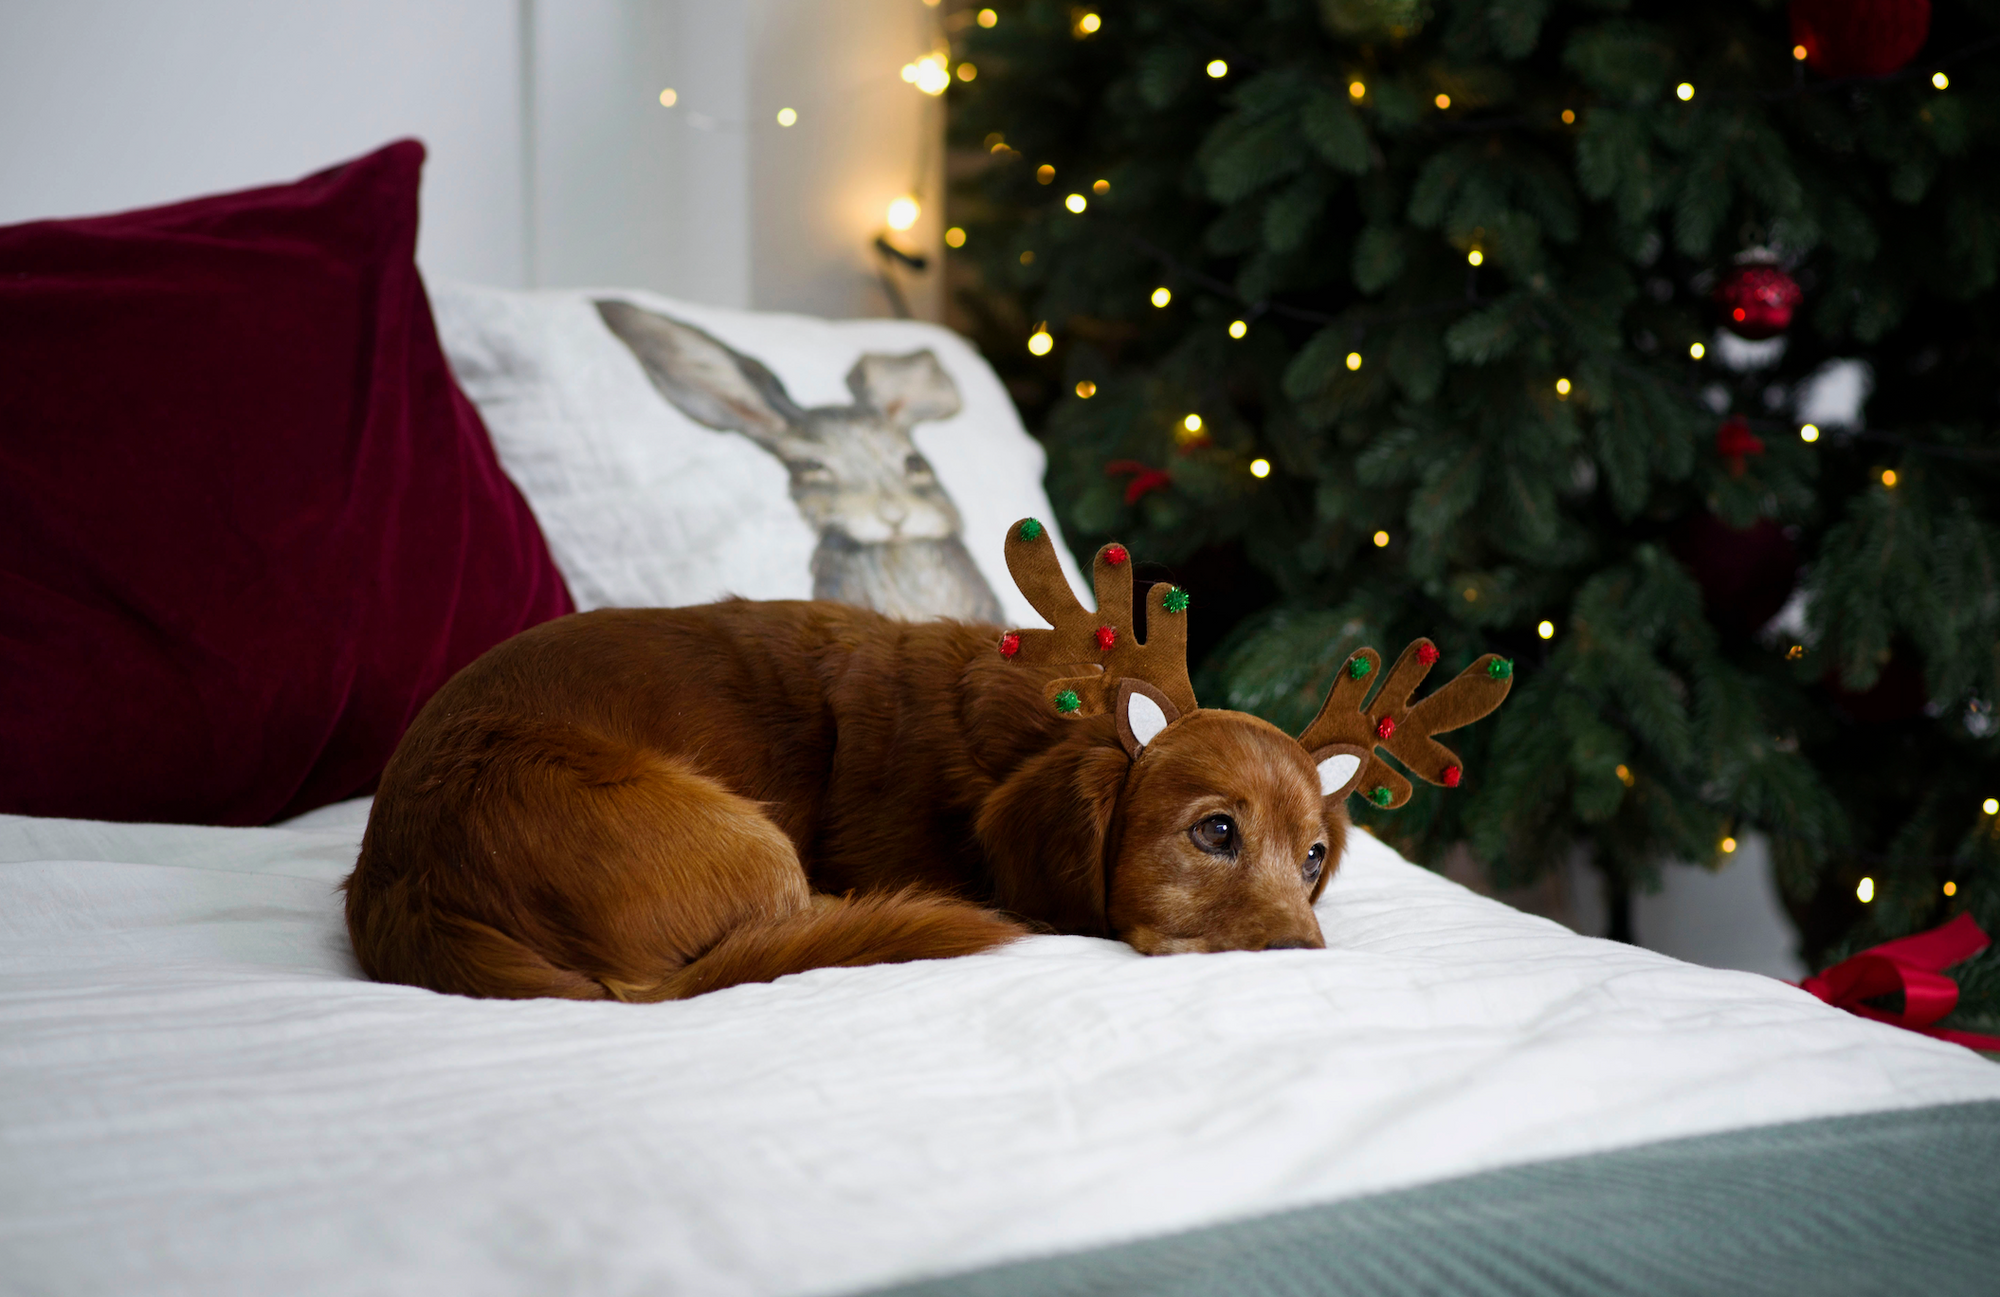 A dog with reindeer antlers lying on a bed.